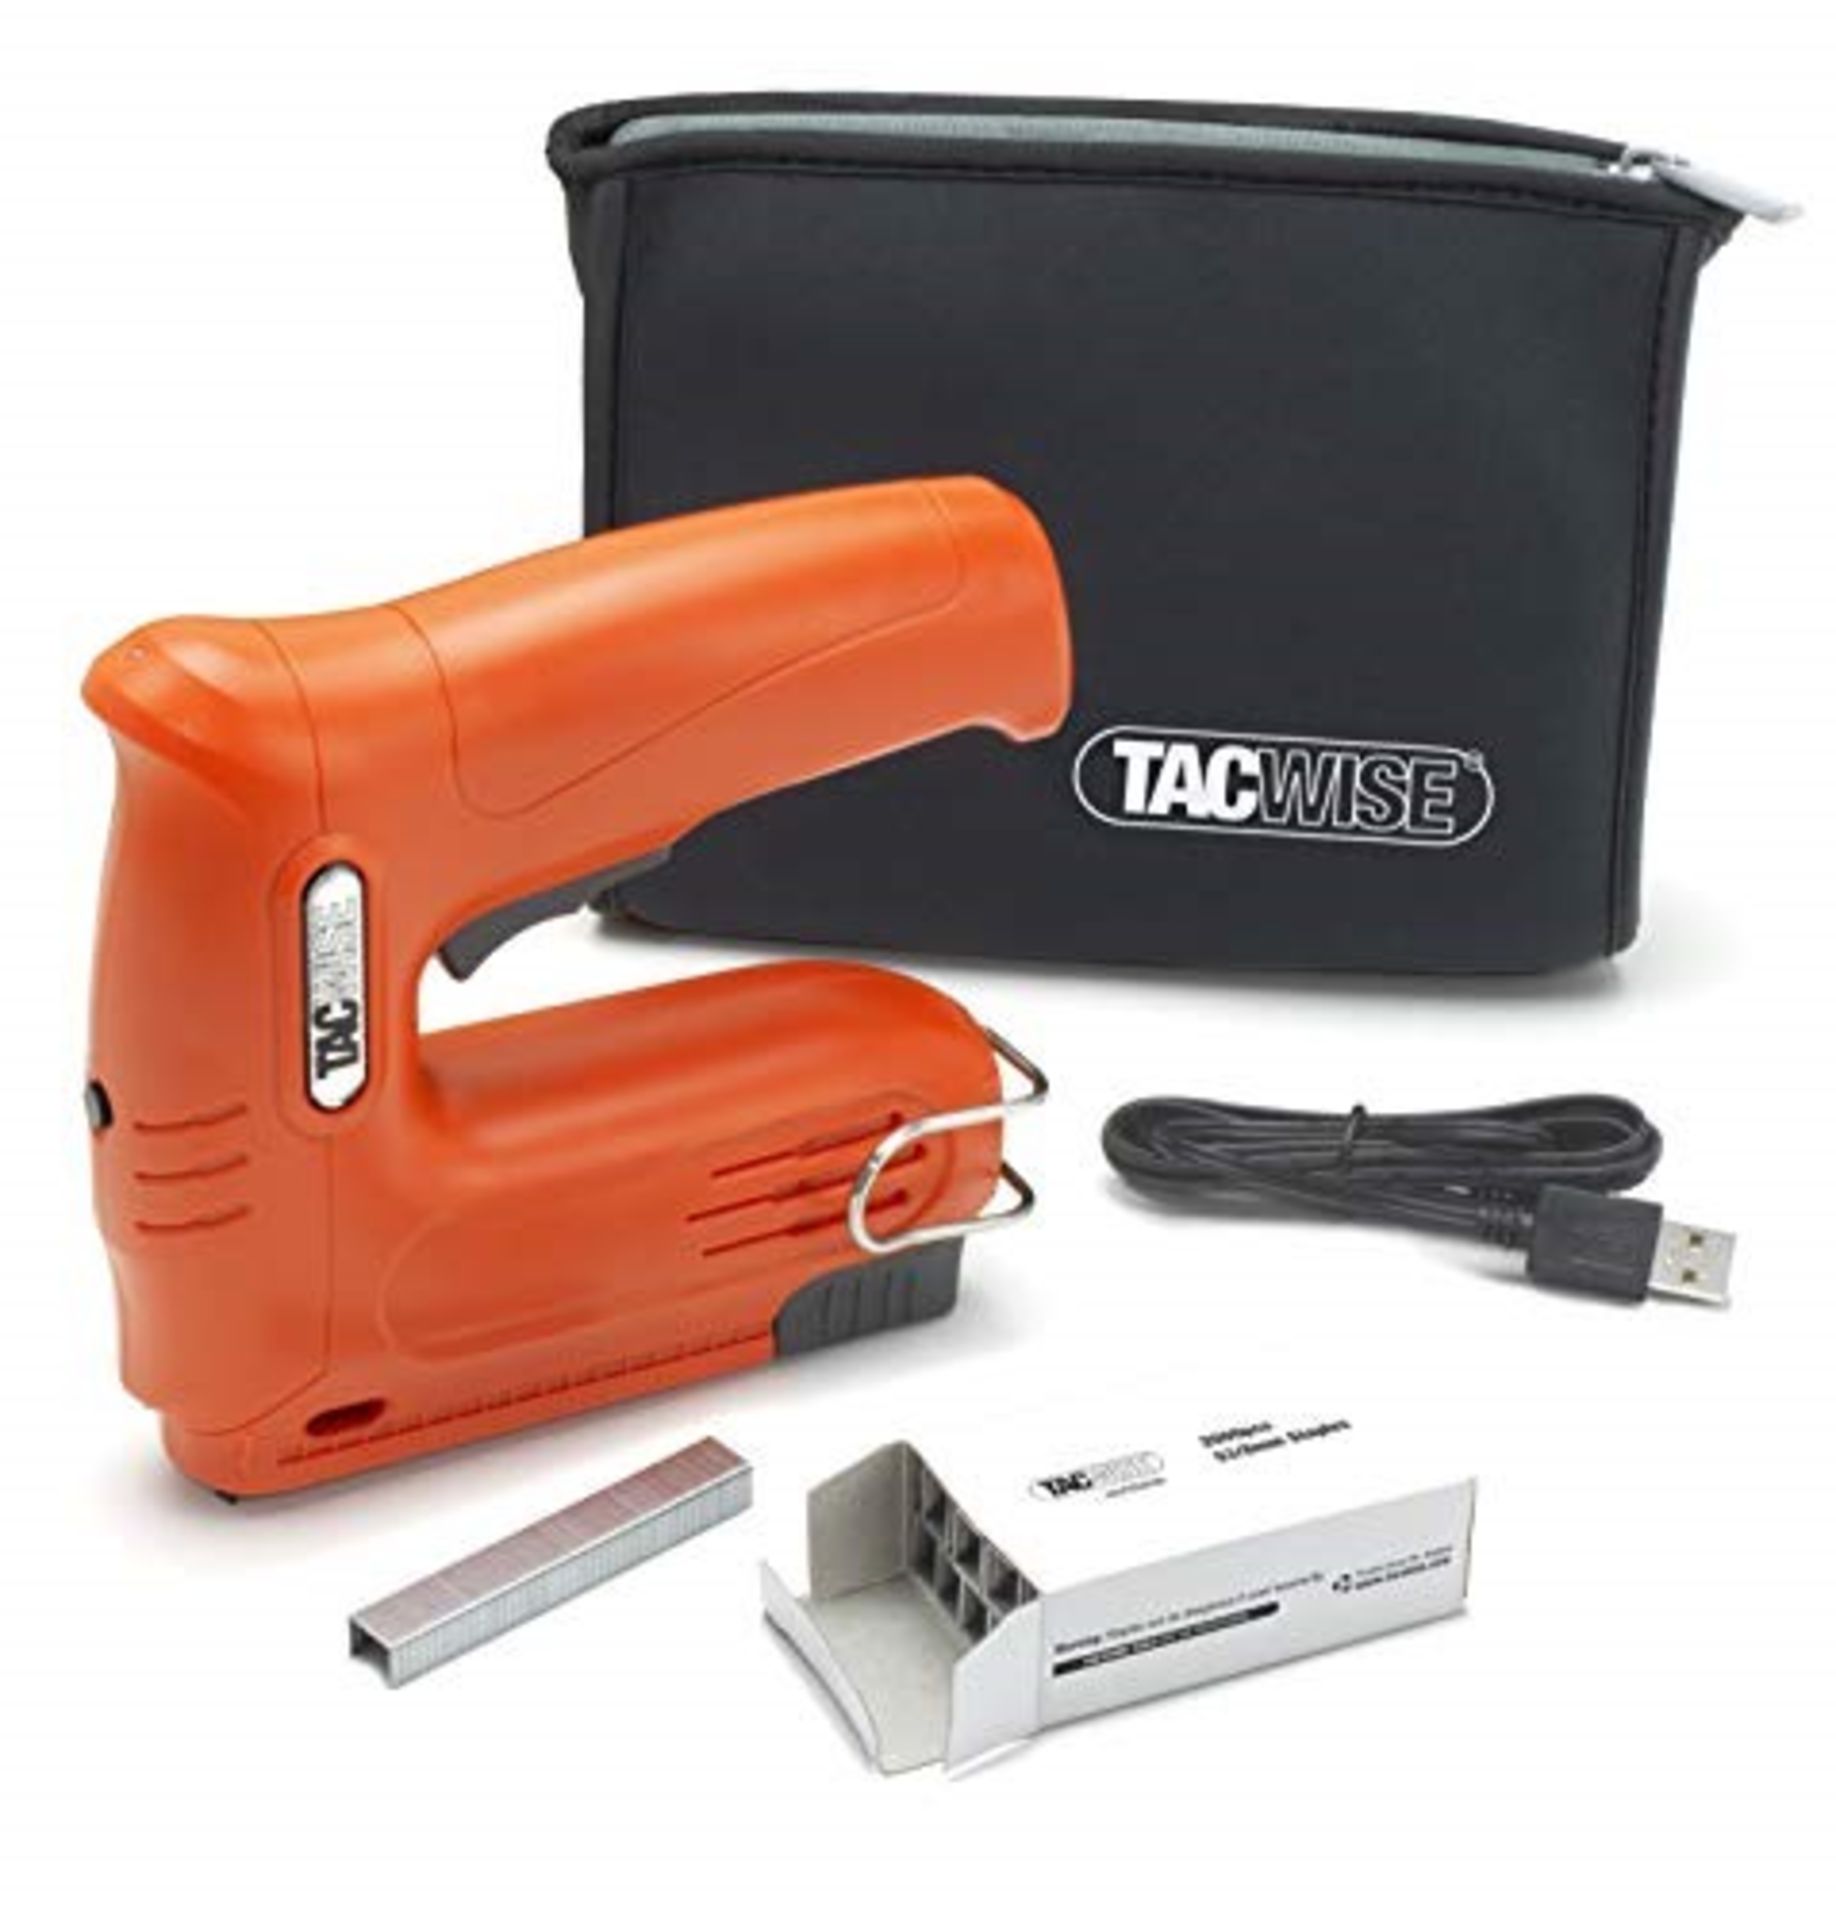 Tacwise 1563 Hobby 53-13EL Cordless 4V Nail Gun with 200pcs Staples Electric Stapler,